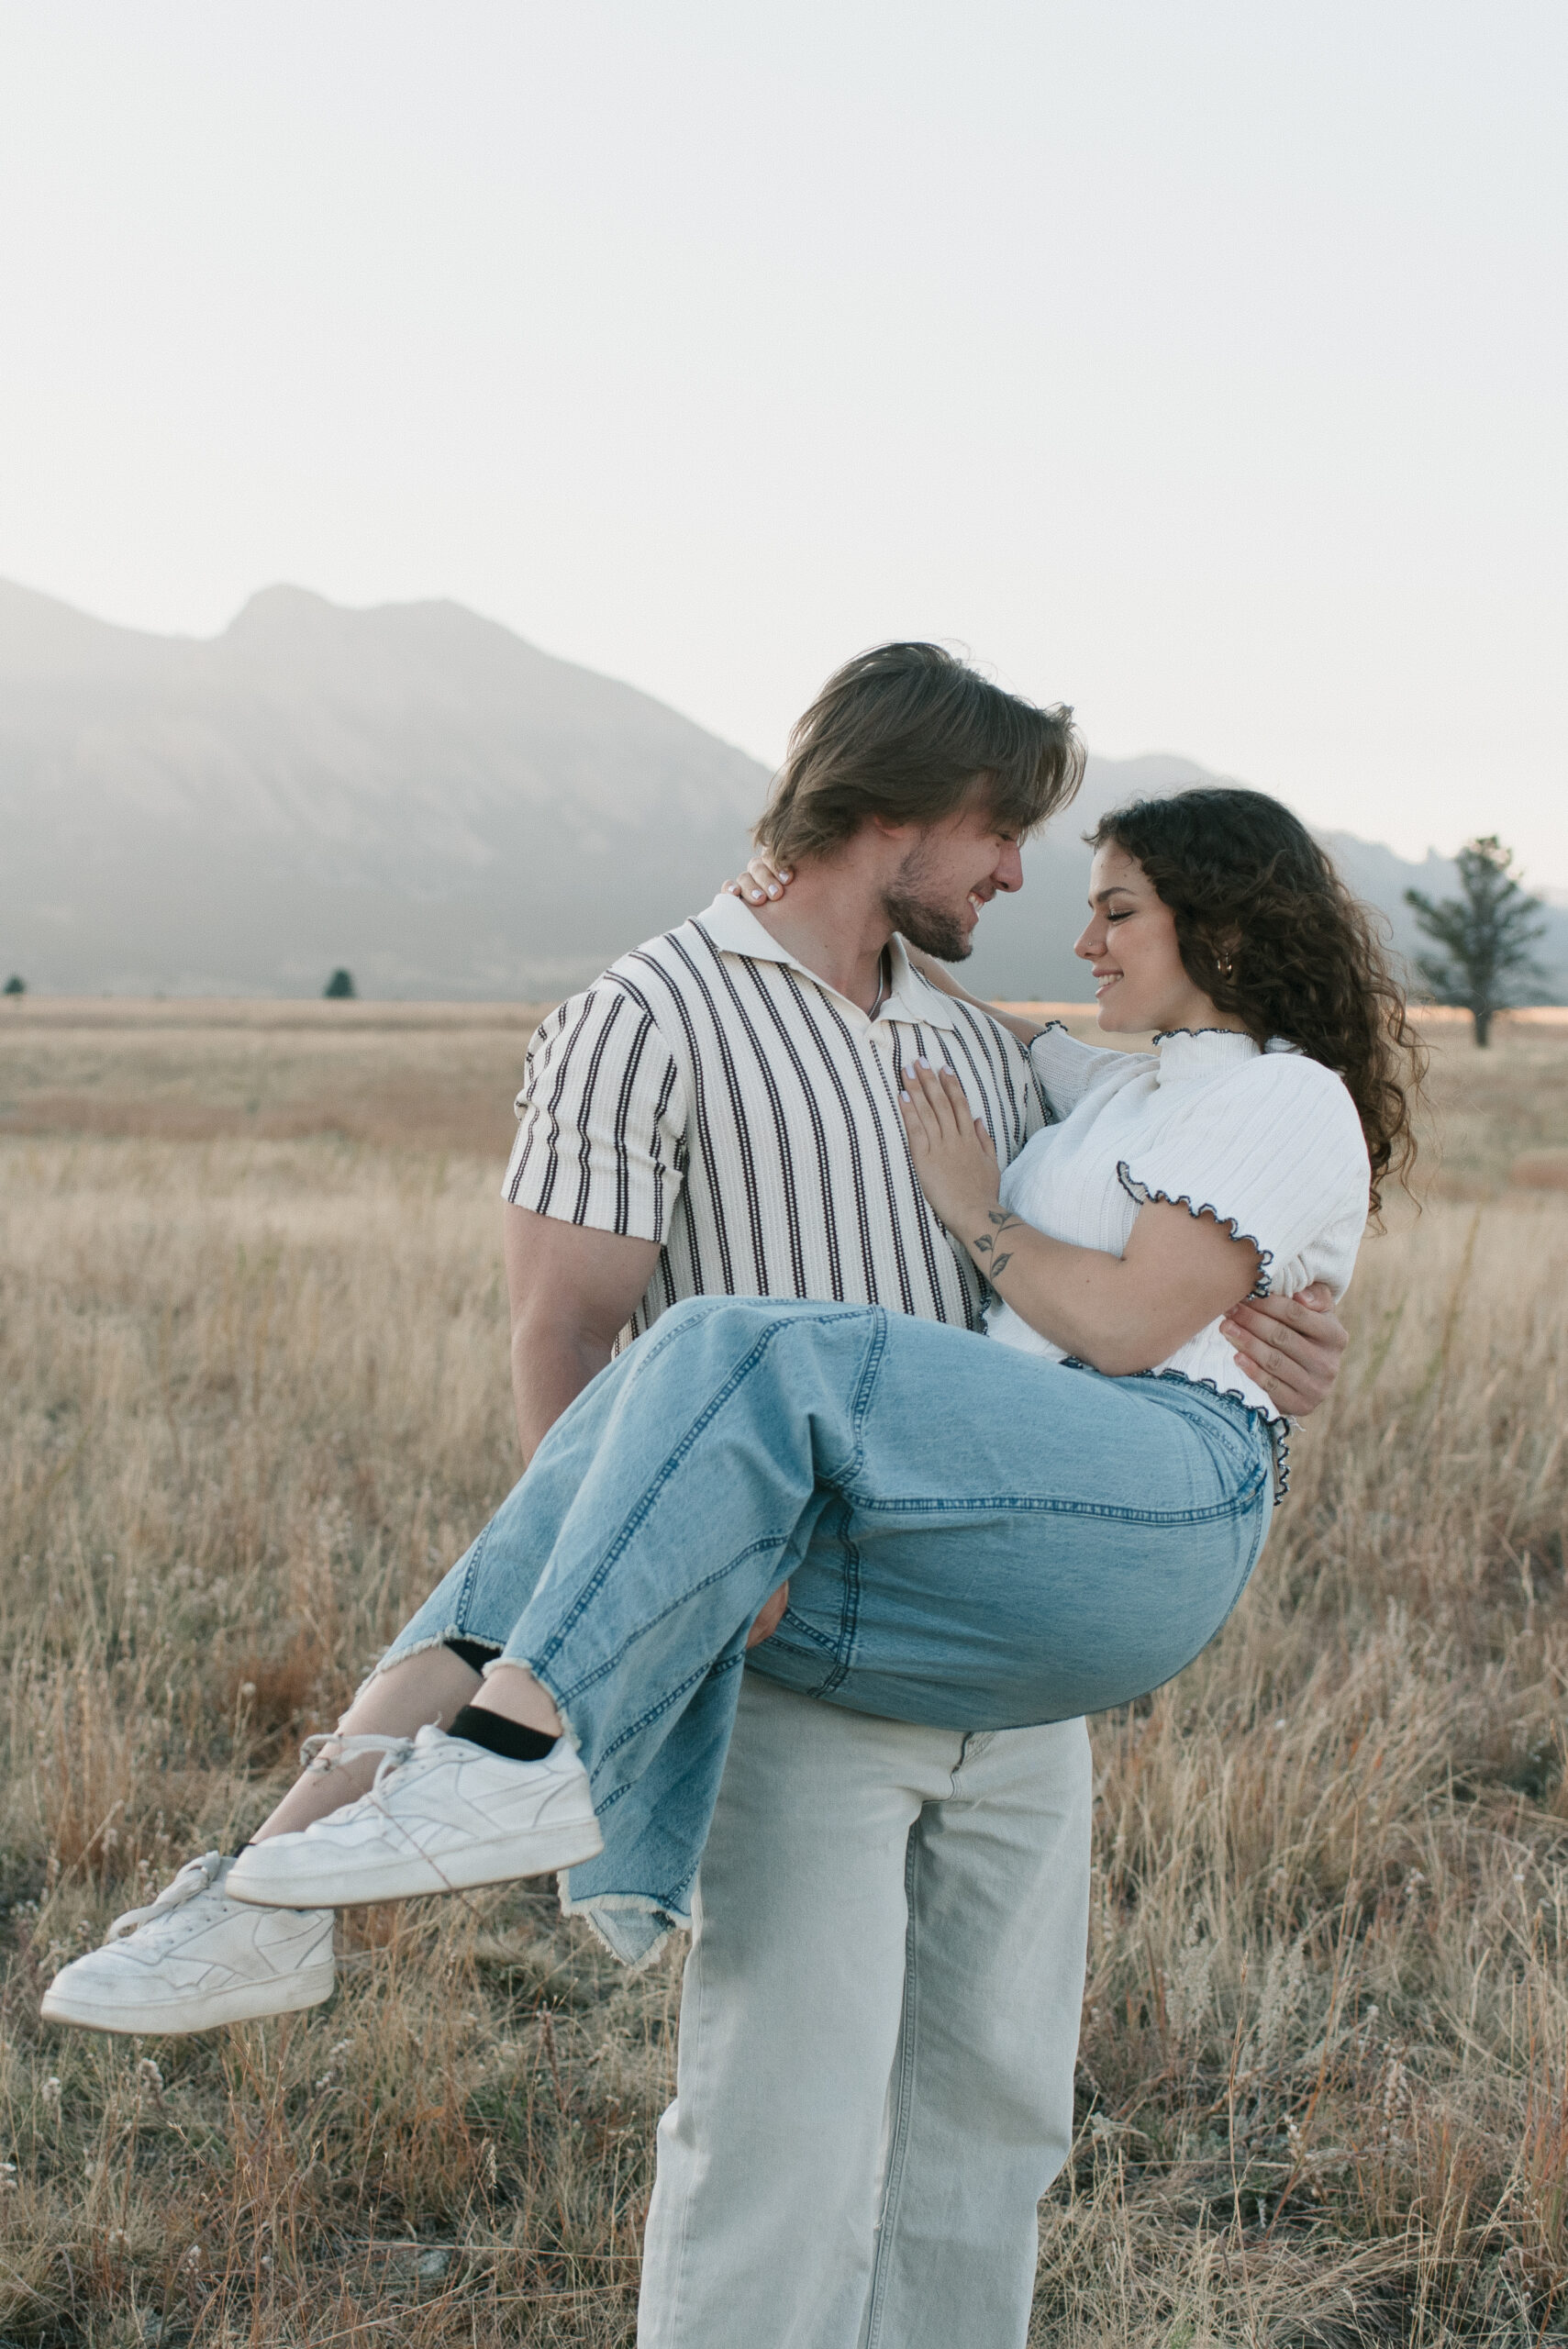 man holding woman in the field during couple photoshoot 